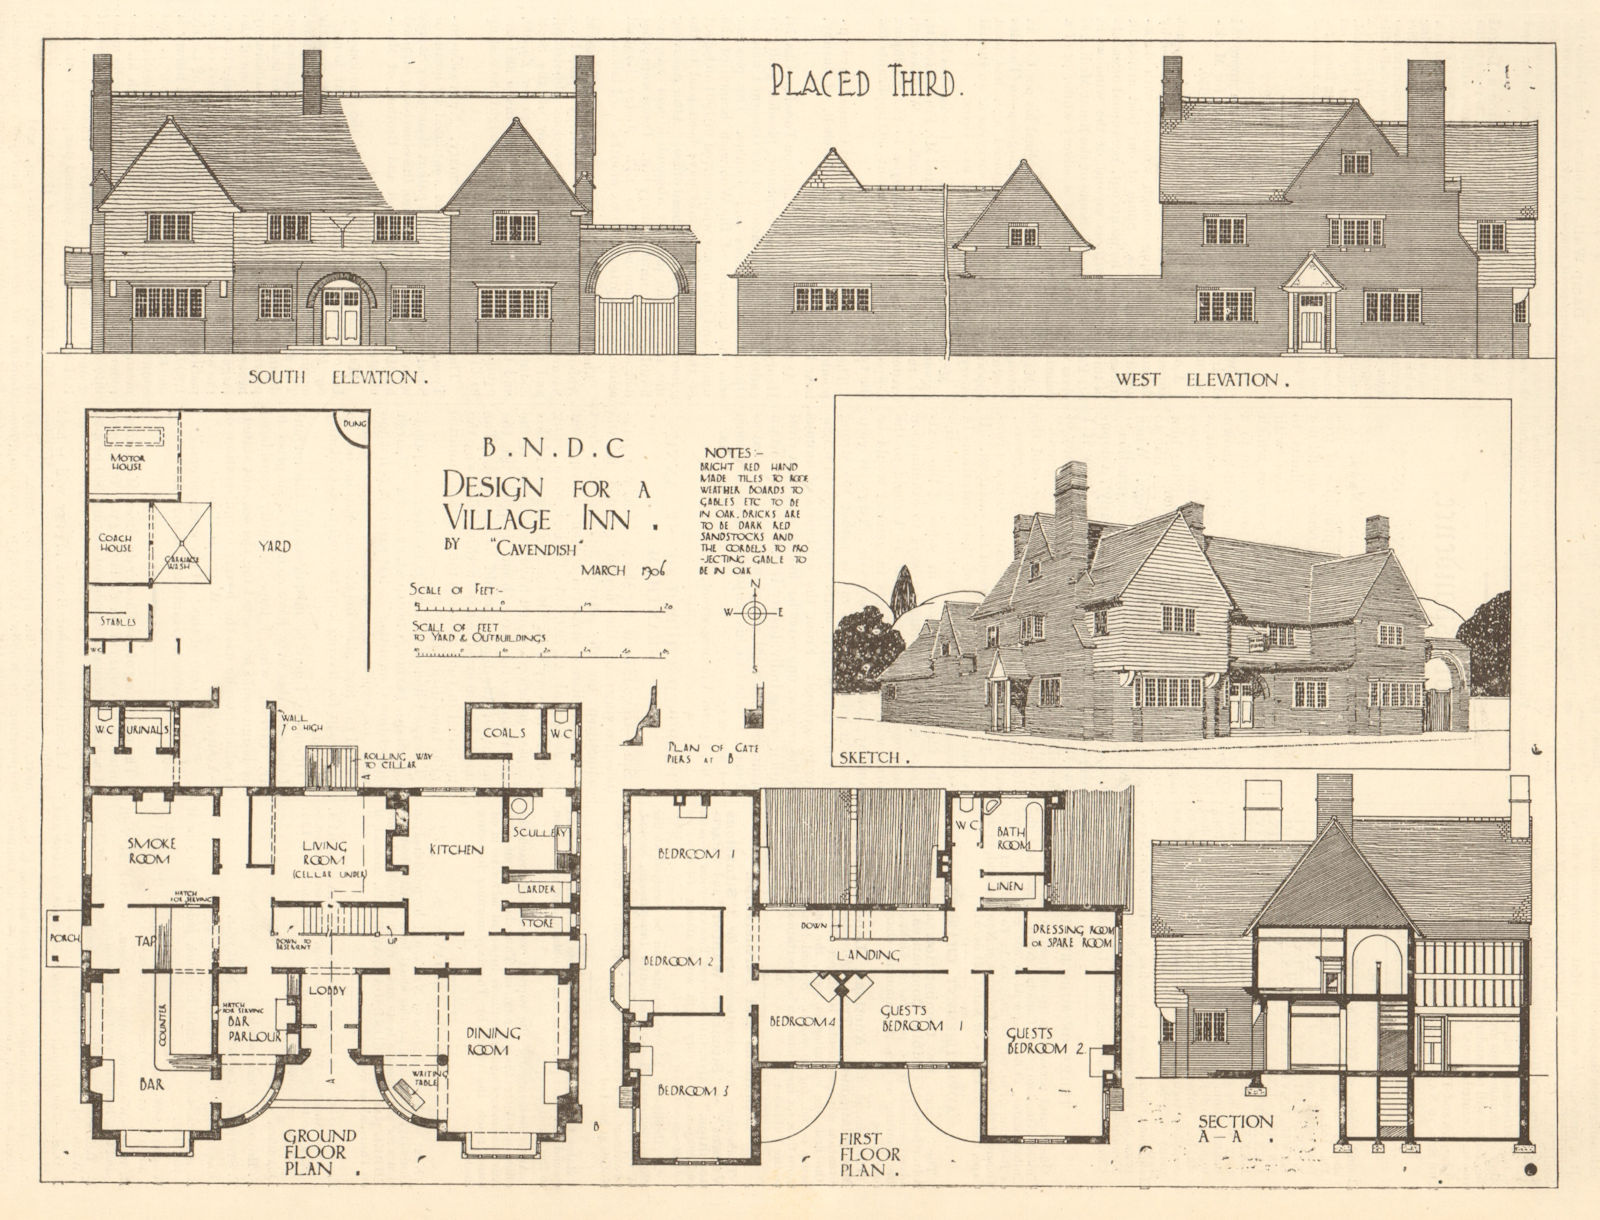 Associate Product Design for a village inn by Cavendish. Sketch, elevations & plans 1906 print